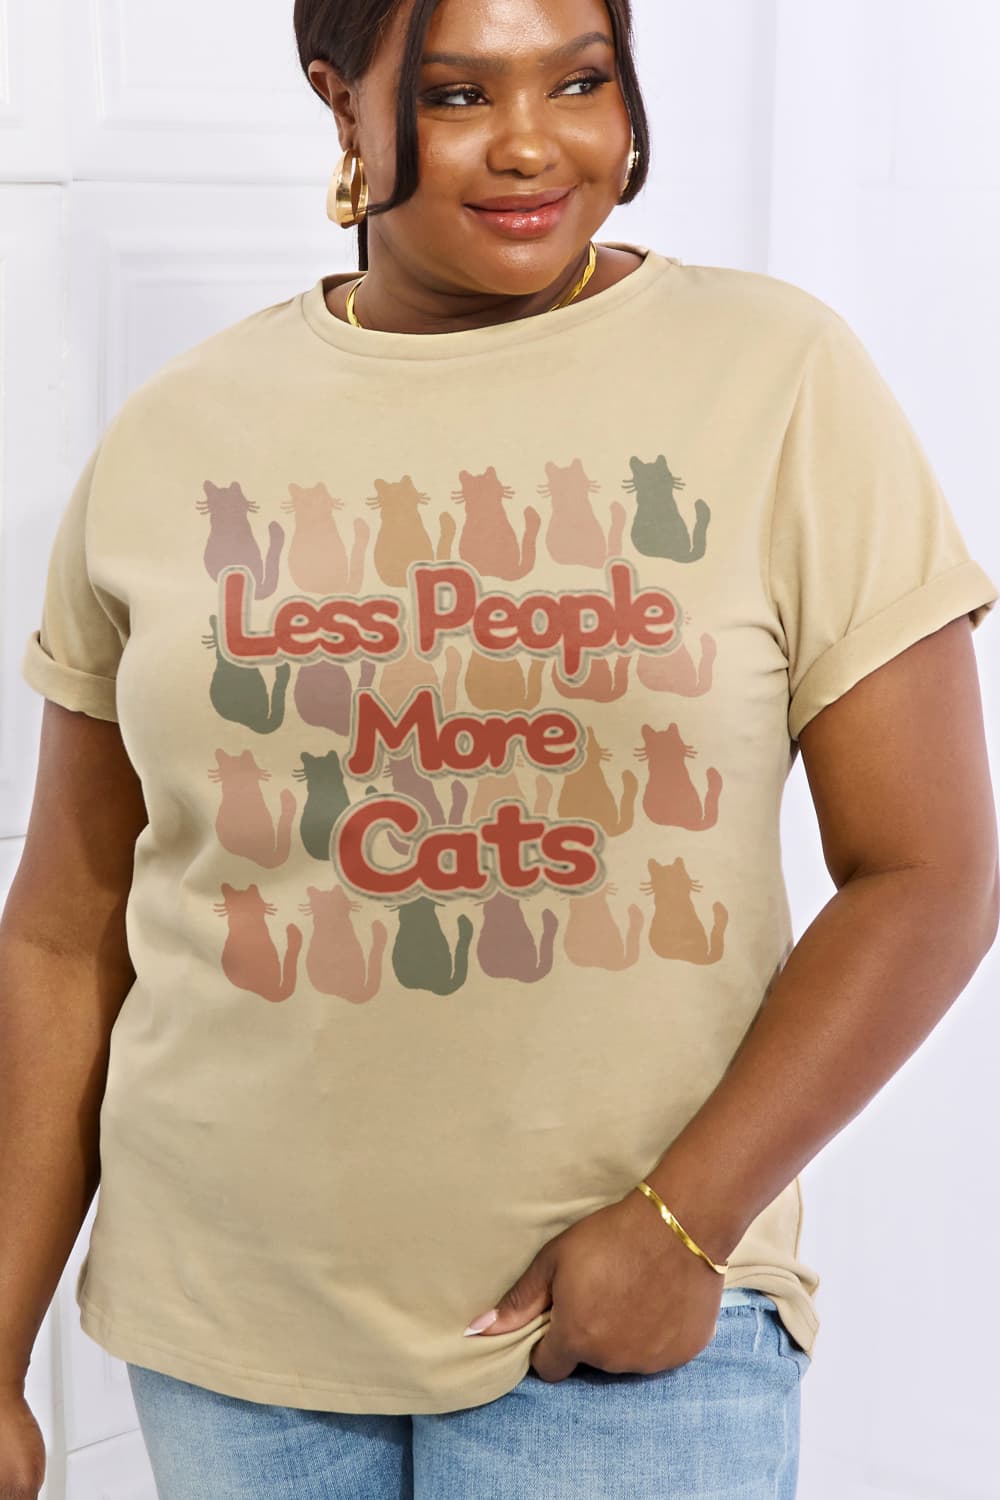 Full Size LESS PEOPLE MORE CATS Graphic Cotton Tee